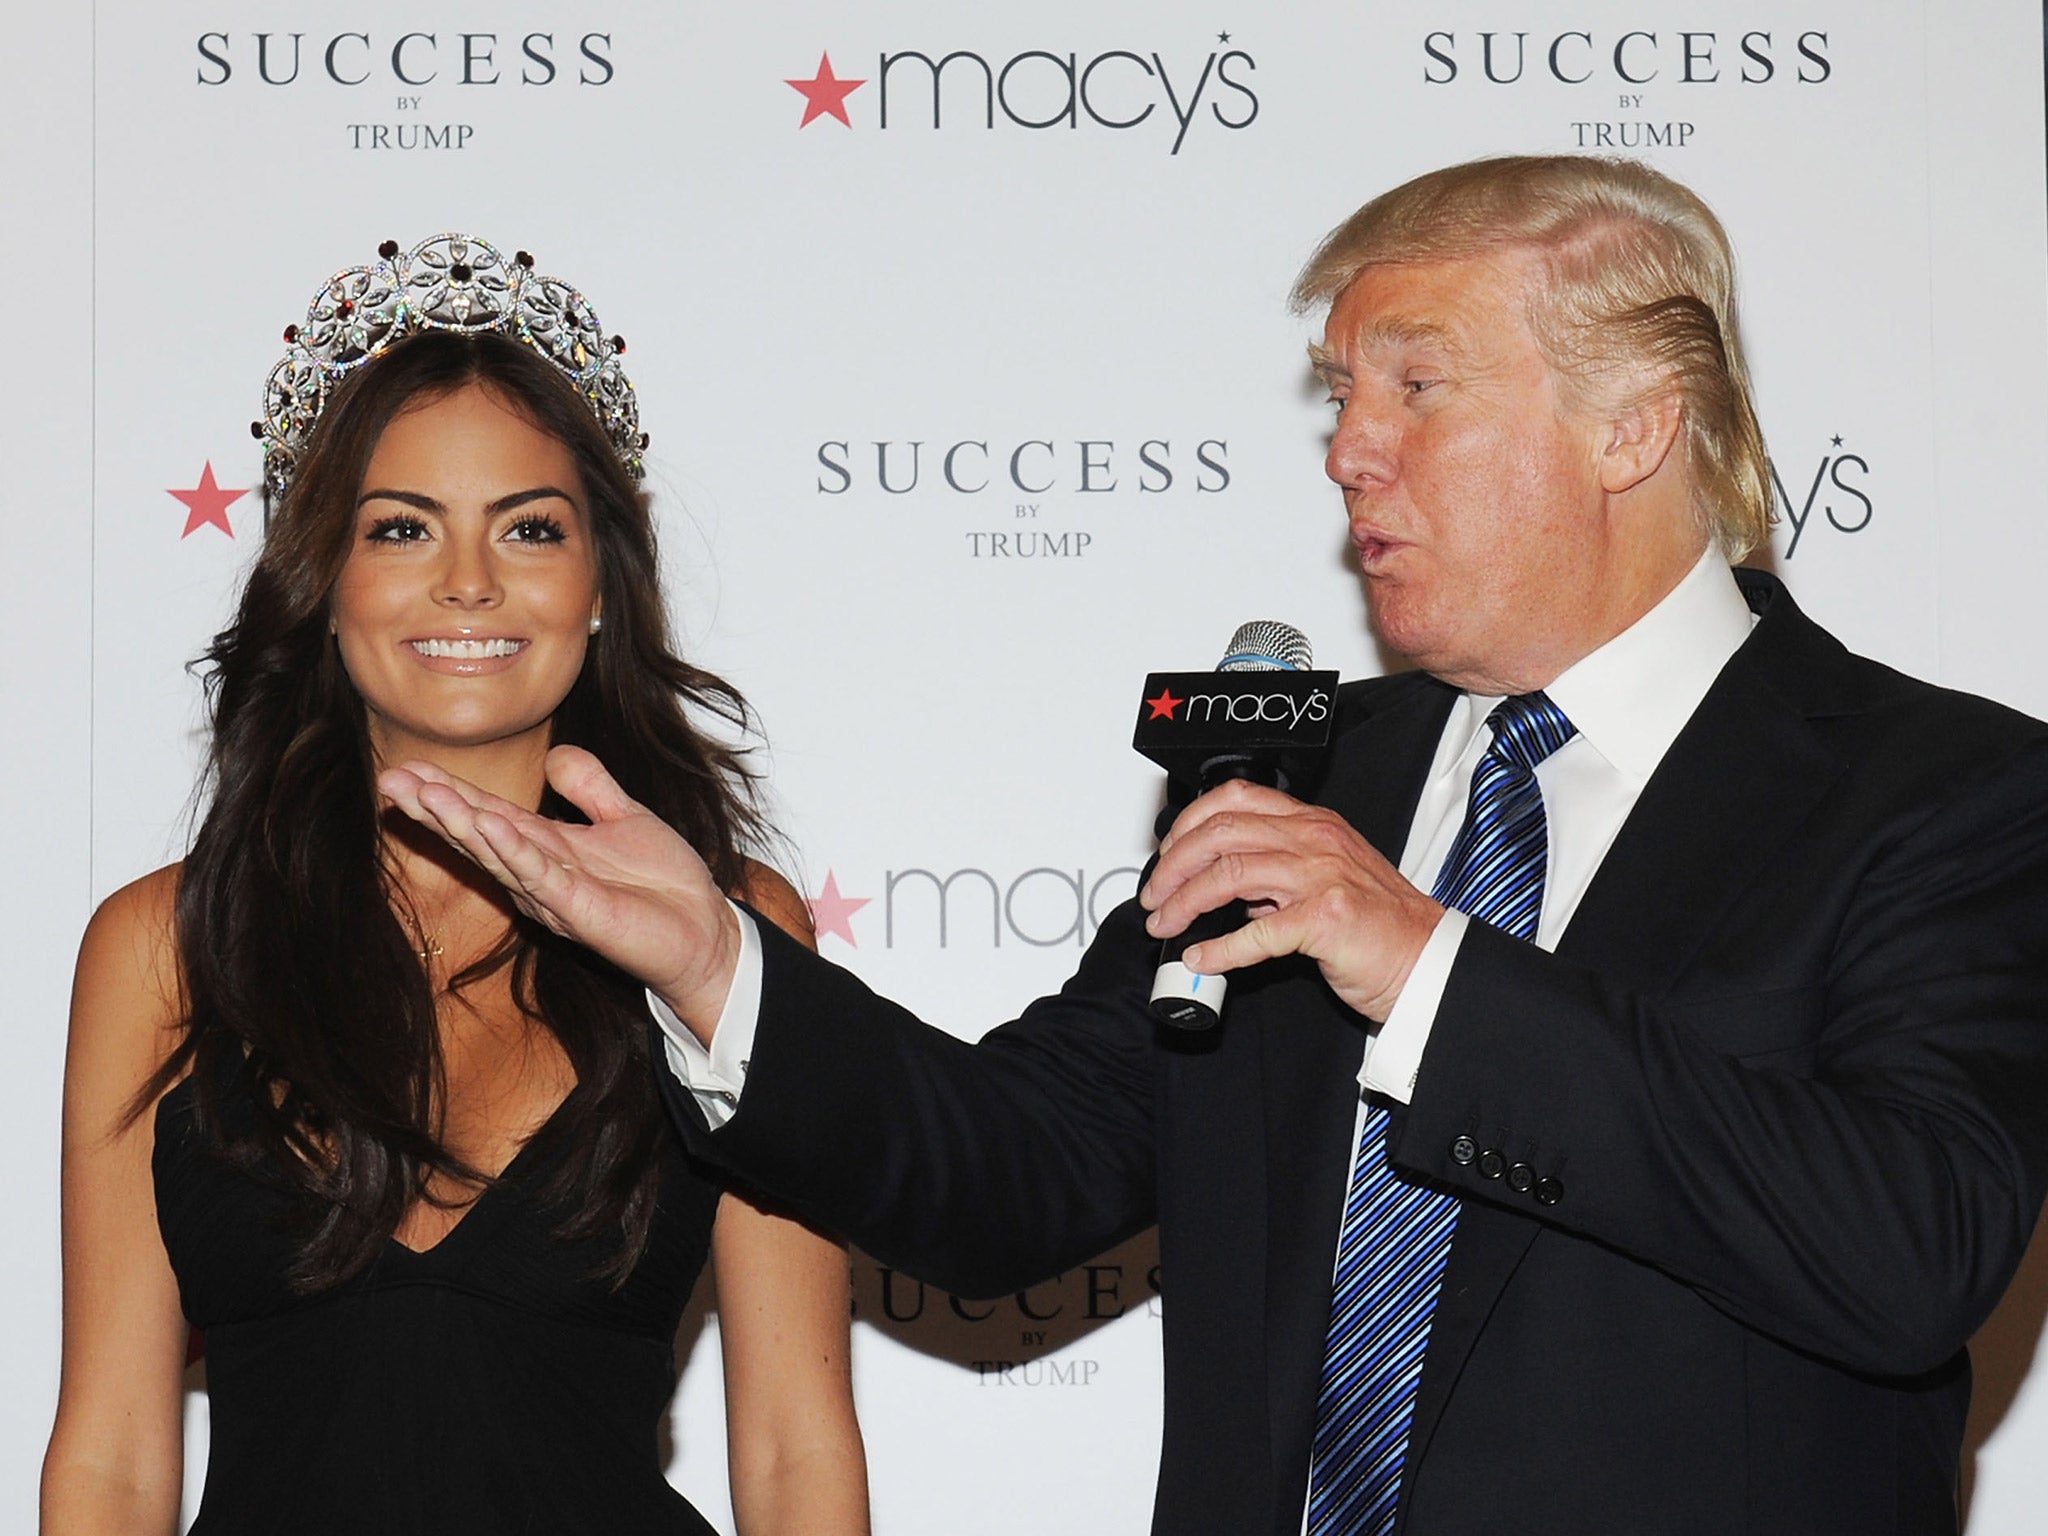 Donald Trump, pictured with Miss Universe 2010 Ximena Navarrete, at the launch of the Billionaire's fragrance, Success, at Macy's in New York City, in 2012